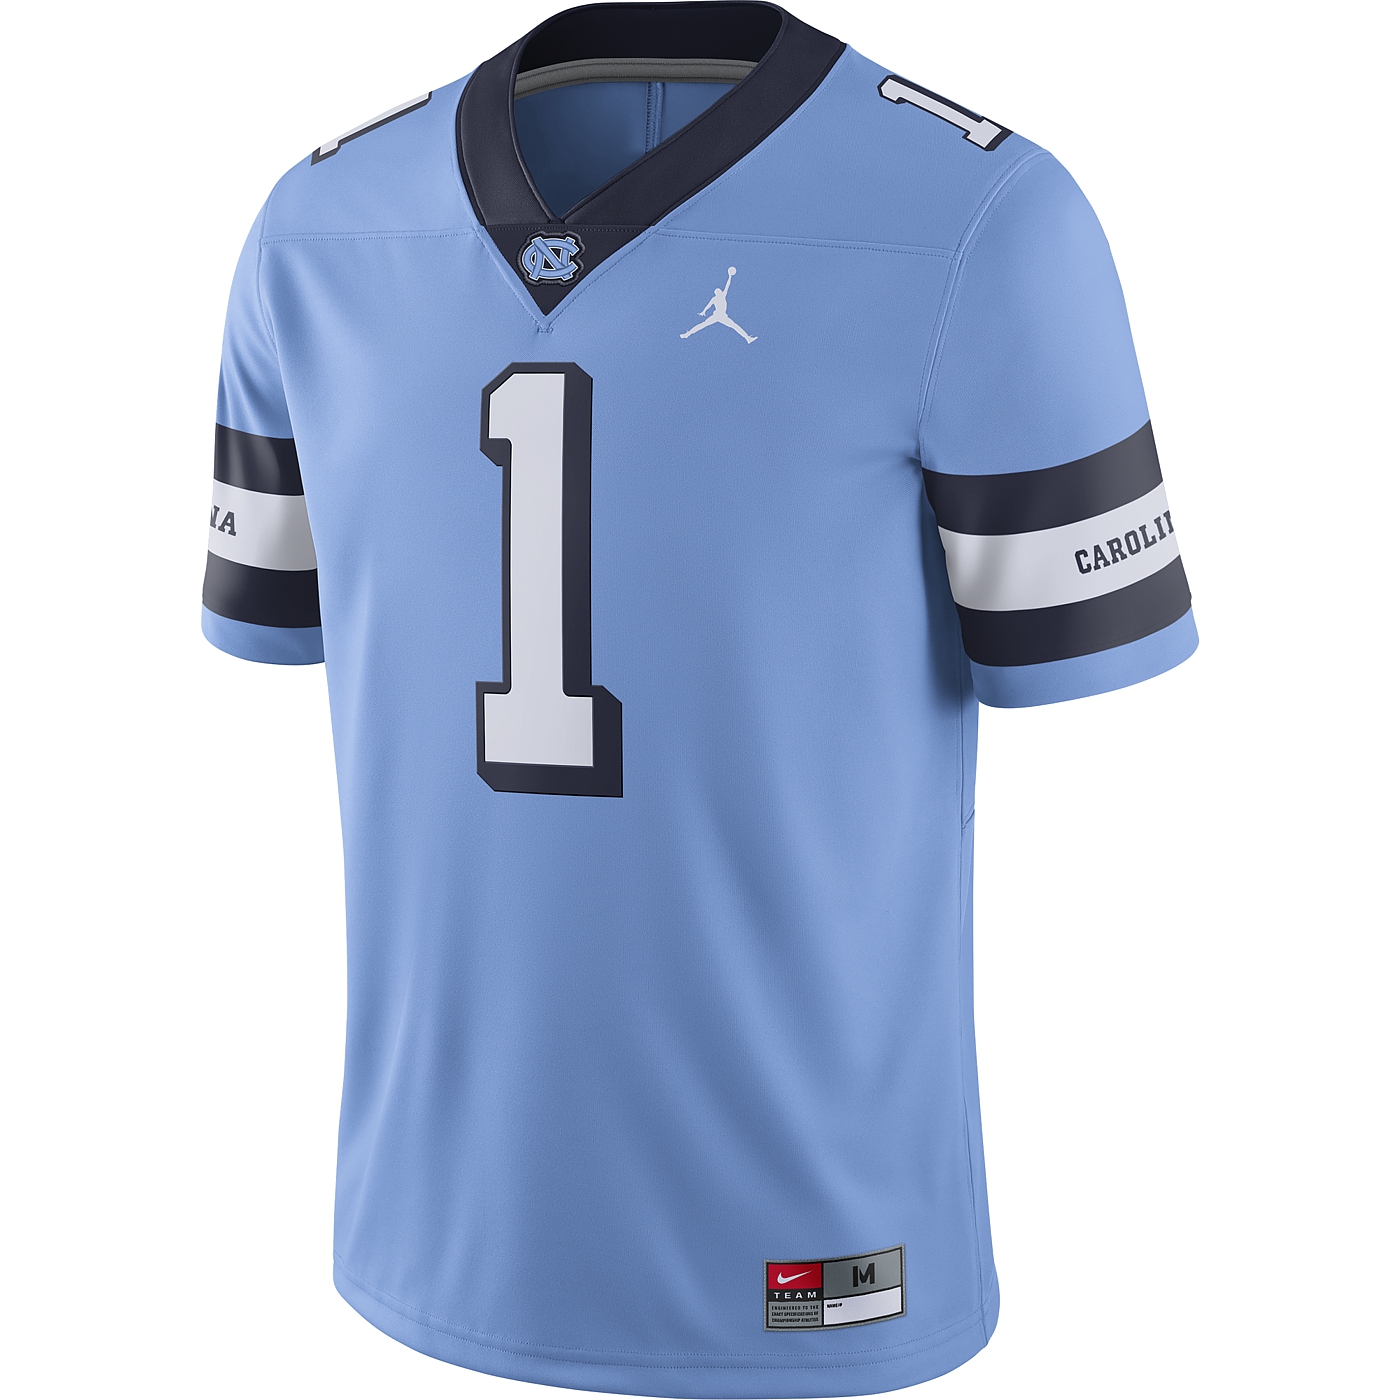 Nike #1 Throwback Football Jersey (CB) by Nike